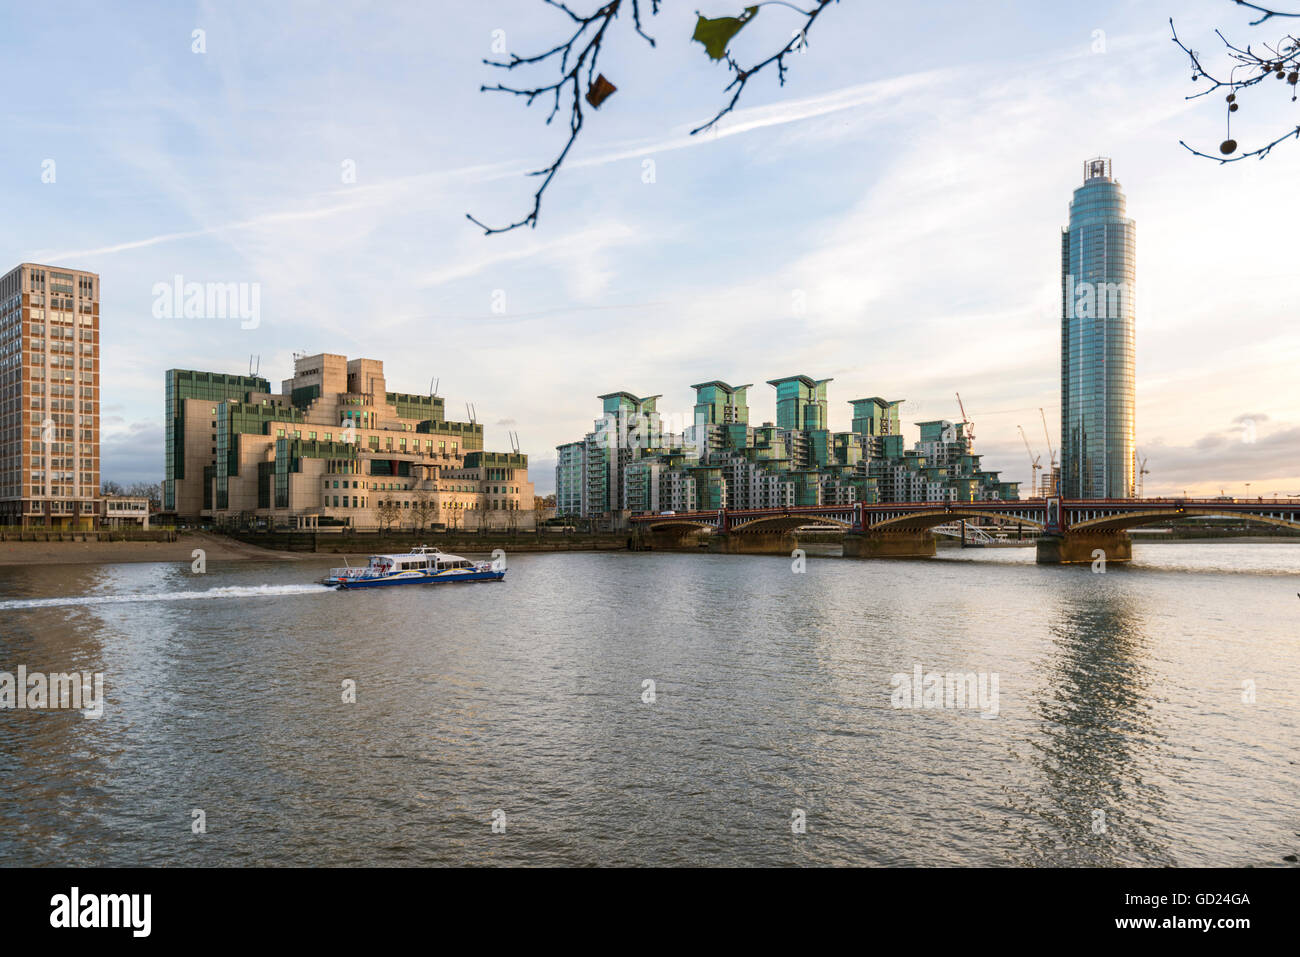 The MI5 Building, St. George's Tower, Vauxhall Bridge and the River Thames, London, England, United Kingdom, Europe Stock Photo